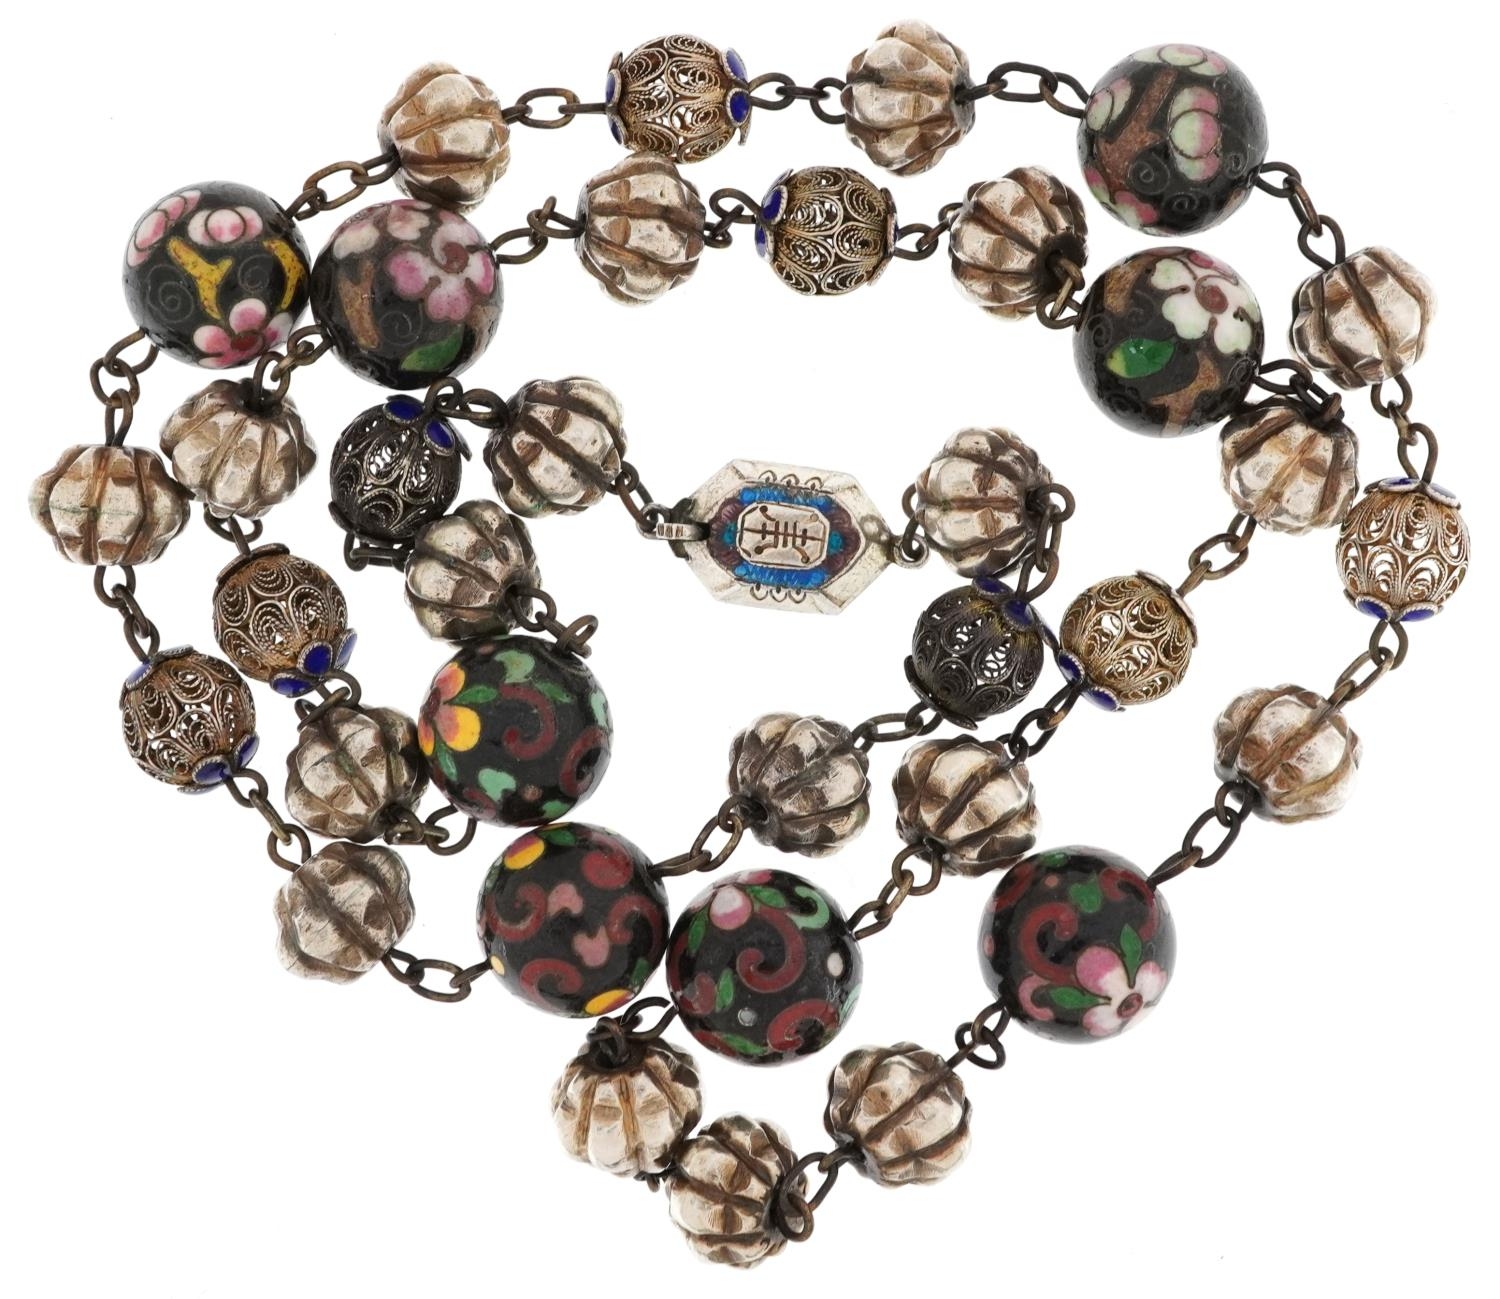 Chinese filigree silver and enamel cloisonne necklace, 72cm in length, 66.6g - Image 2 of 3